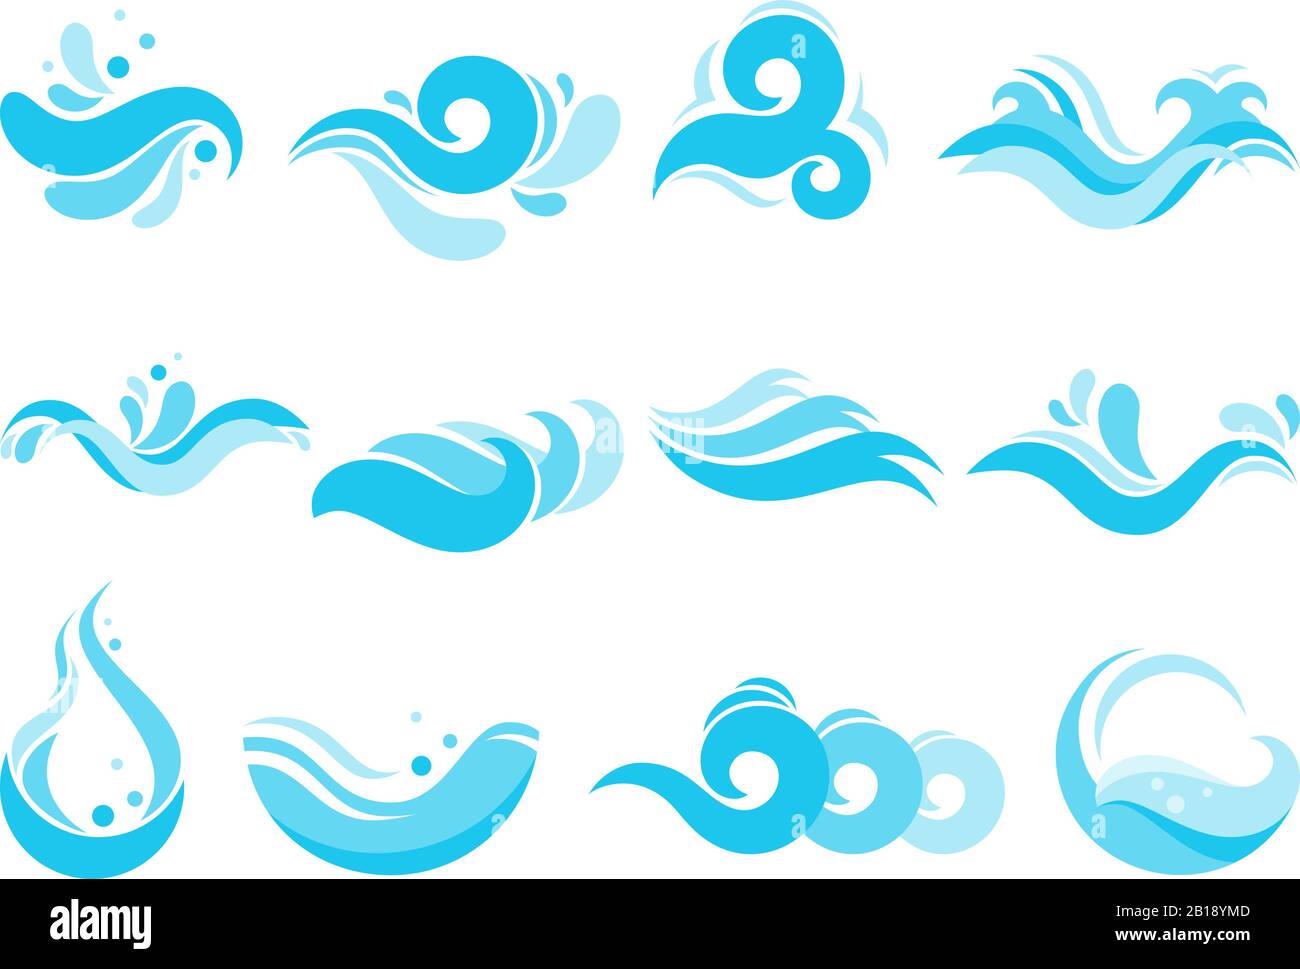 Sea water splash. Spa pool waves, ocean surf tide and waters swirls isolated vector icons illustration set Stock Vector